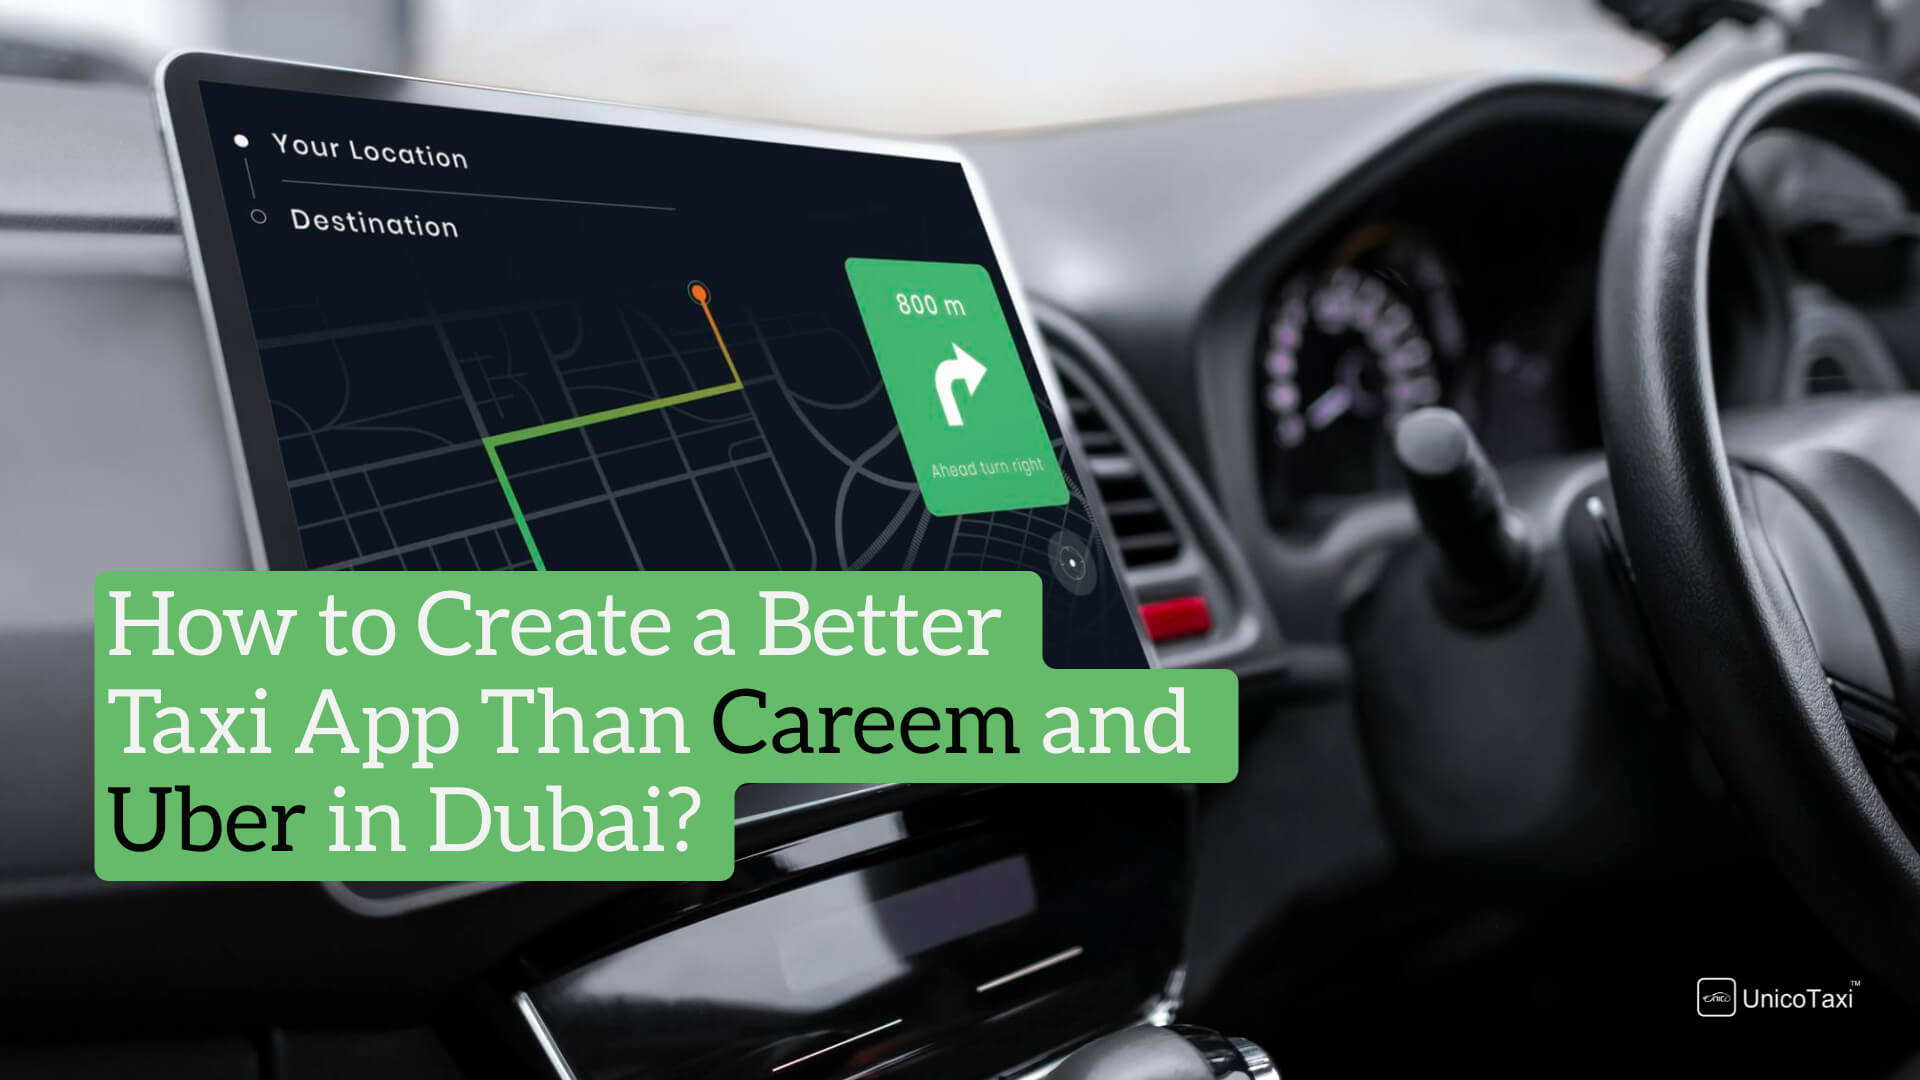 How to Create a Better Taxi App Than Careem and Uber in Dubai?